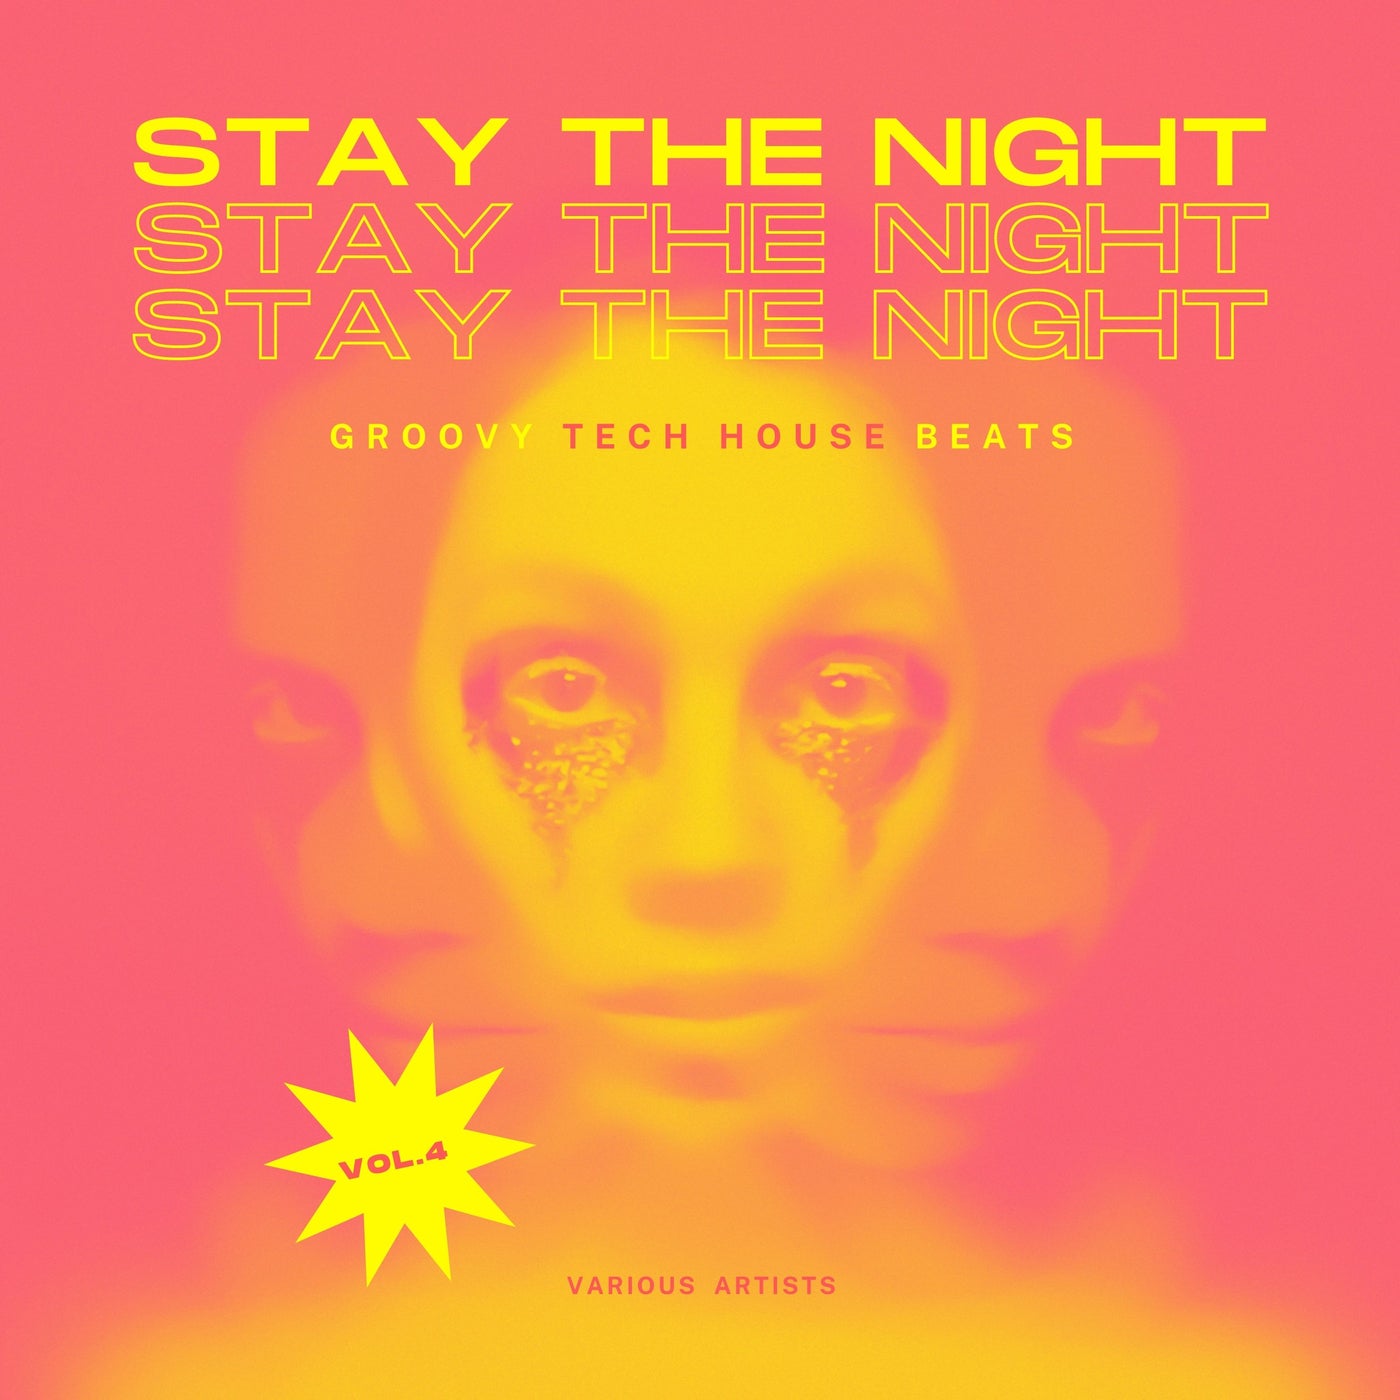 Stay The Night (Groovy Tech House Beats), Vol. 4